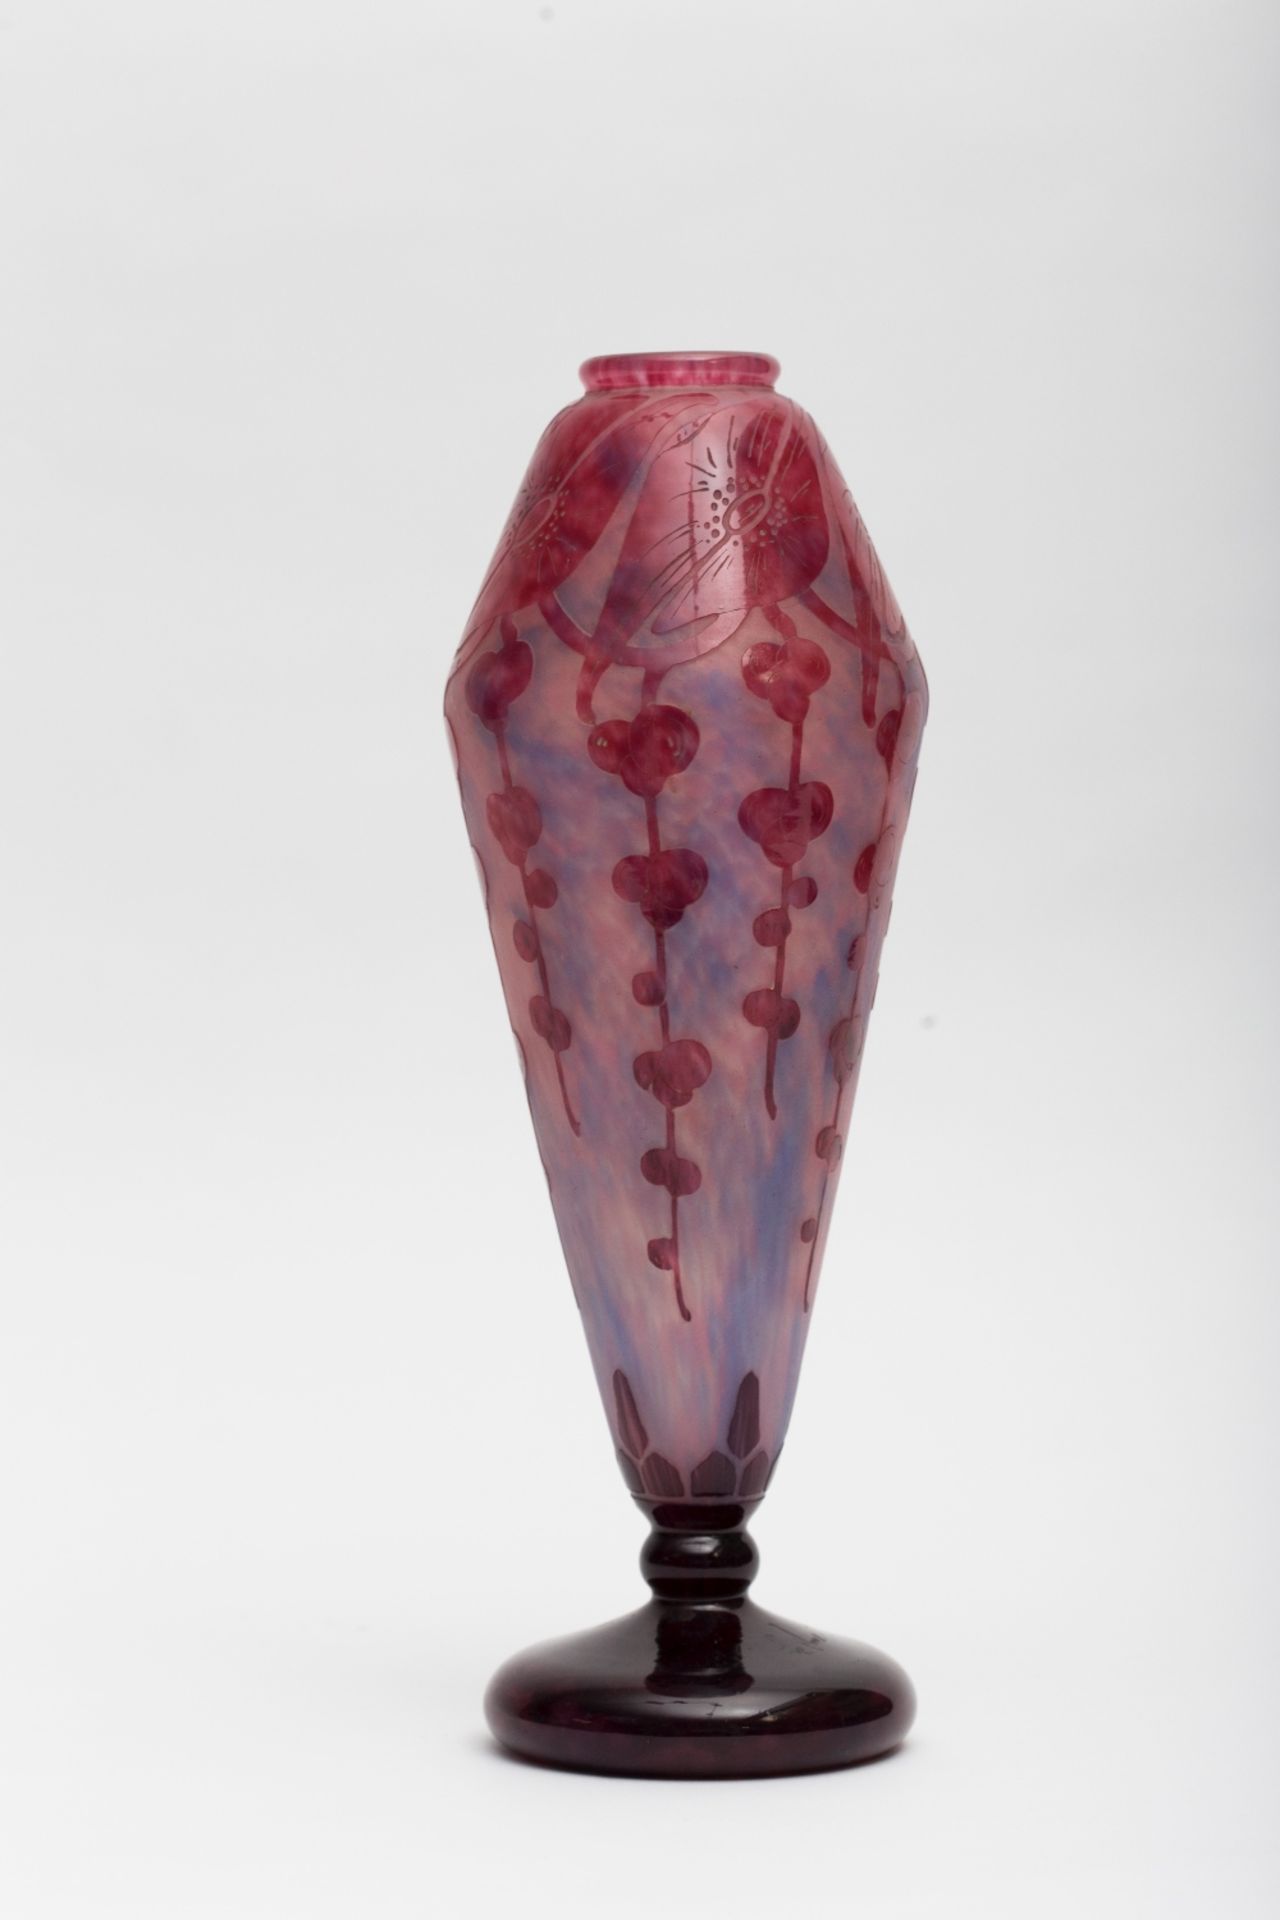 Le Verre FrancaisStylised flowers; Tall thick pink glass vase with blue pinpoints, with pink and